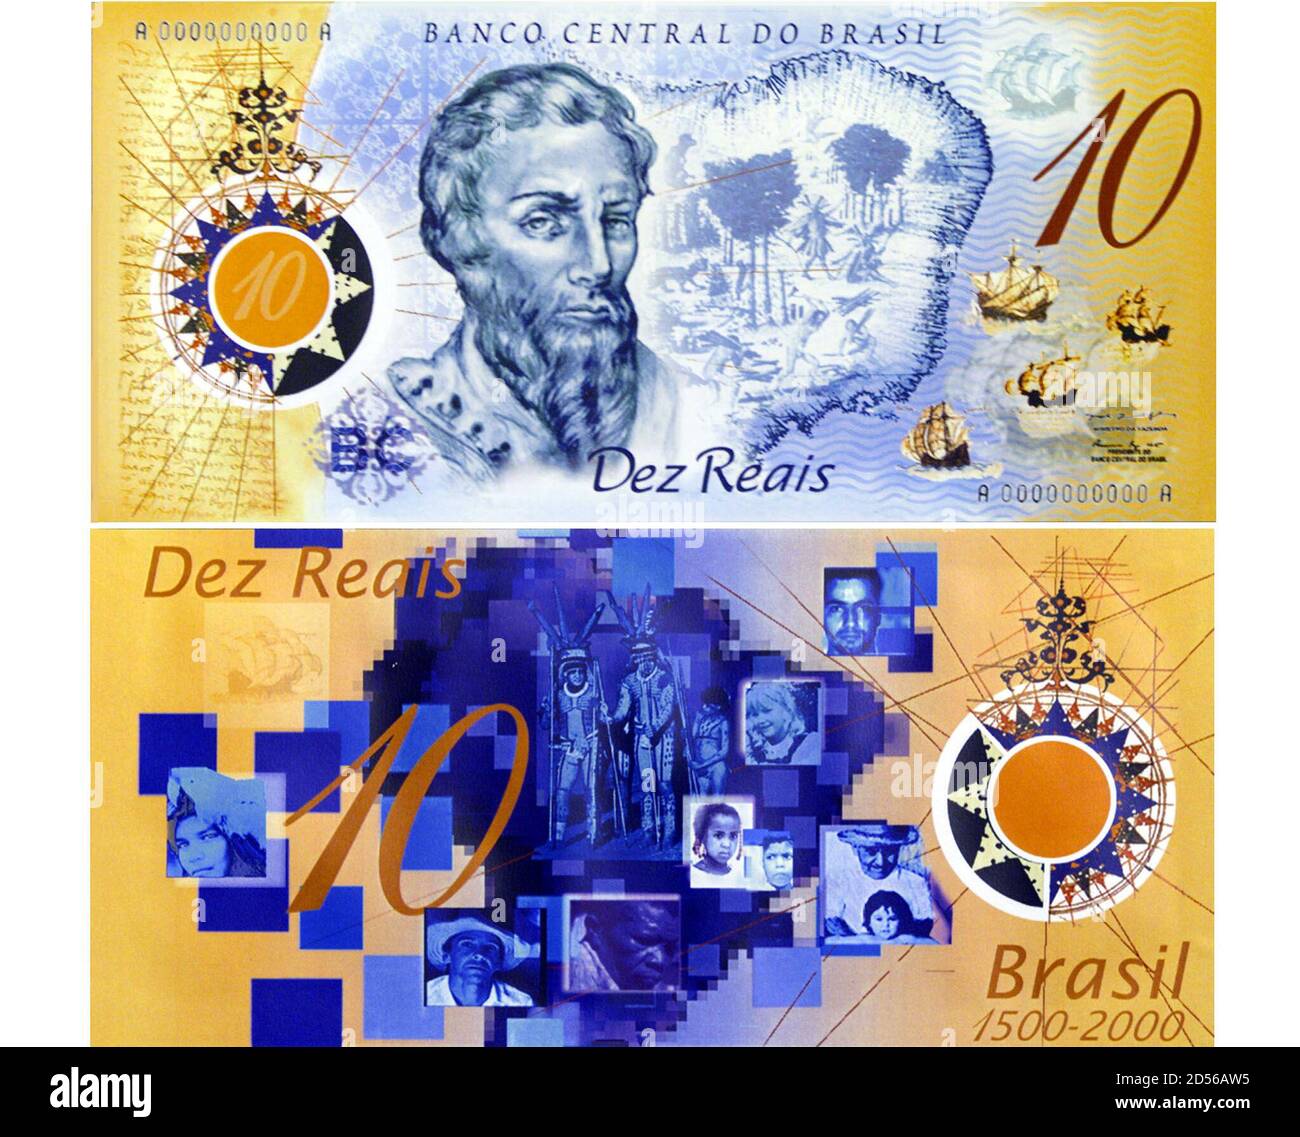 The front and back of new R$ 10 bank notes are shown at the Central Bank in Brasilia July 9. With a current value of about six U.S. dollars, the new Reals